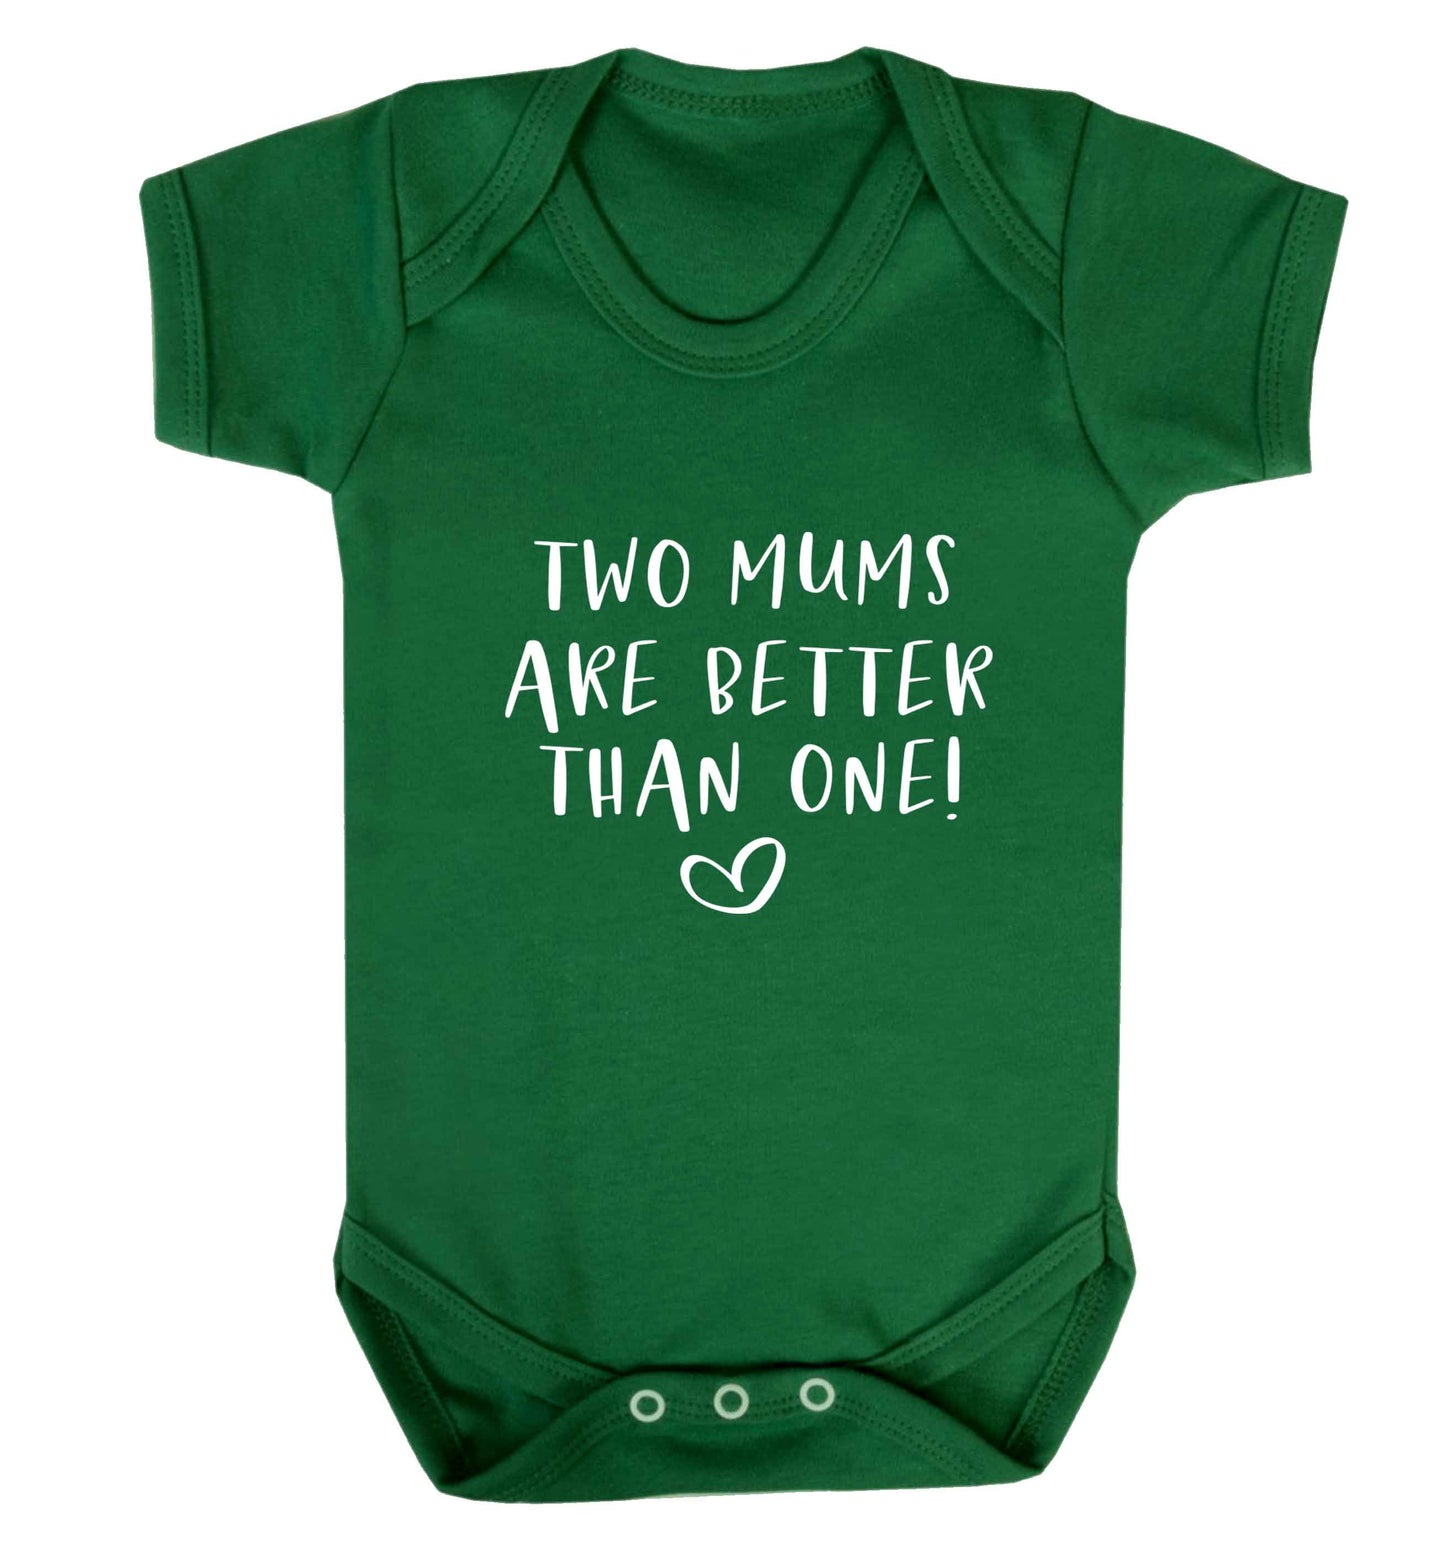 Two mums are better than one baby vest green 18-24 months